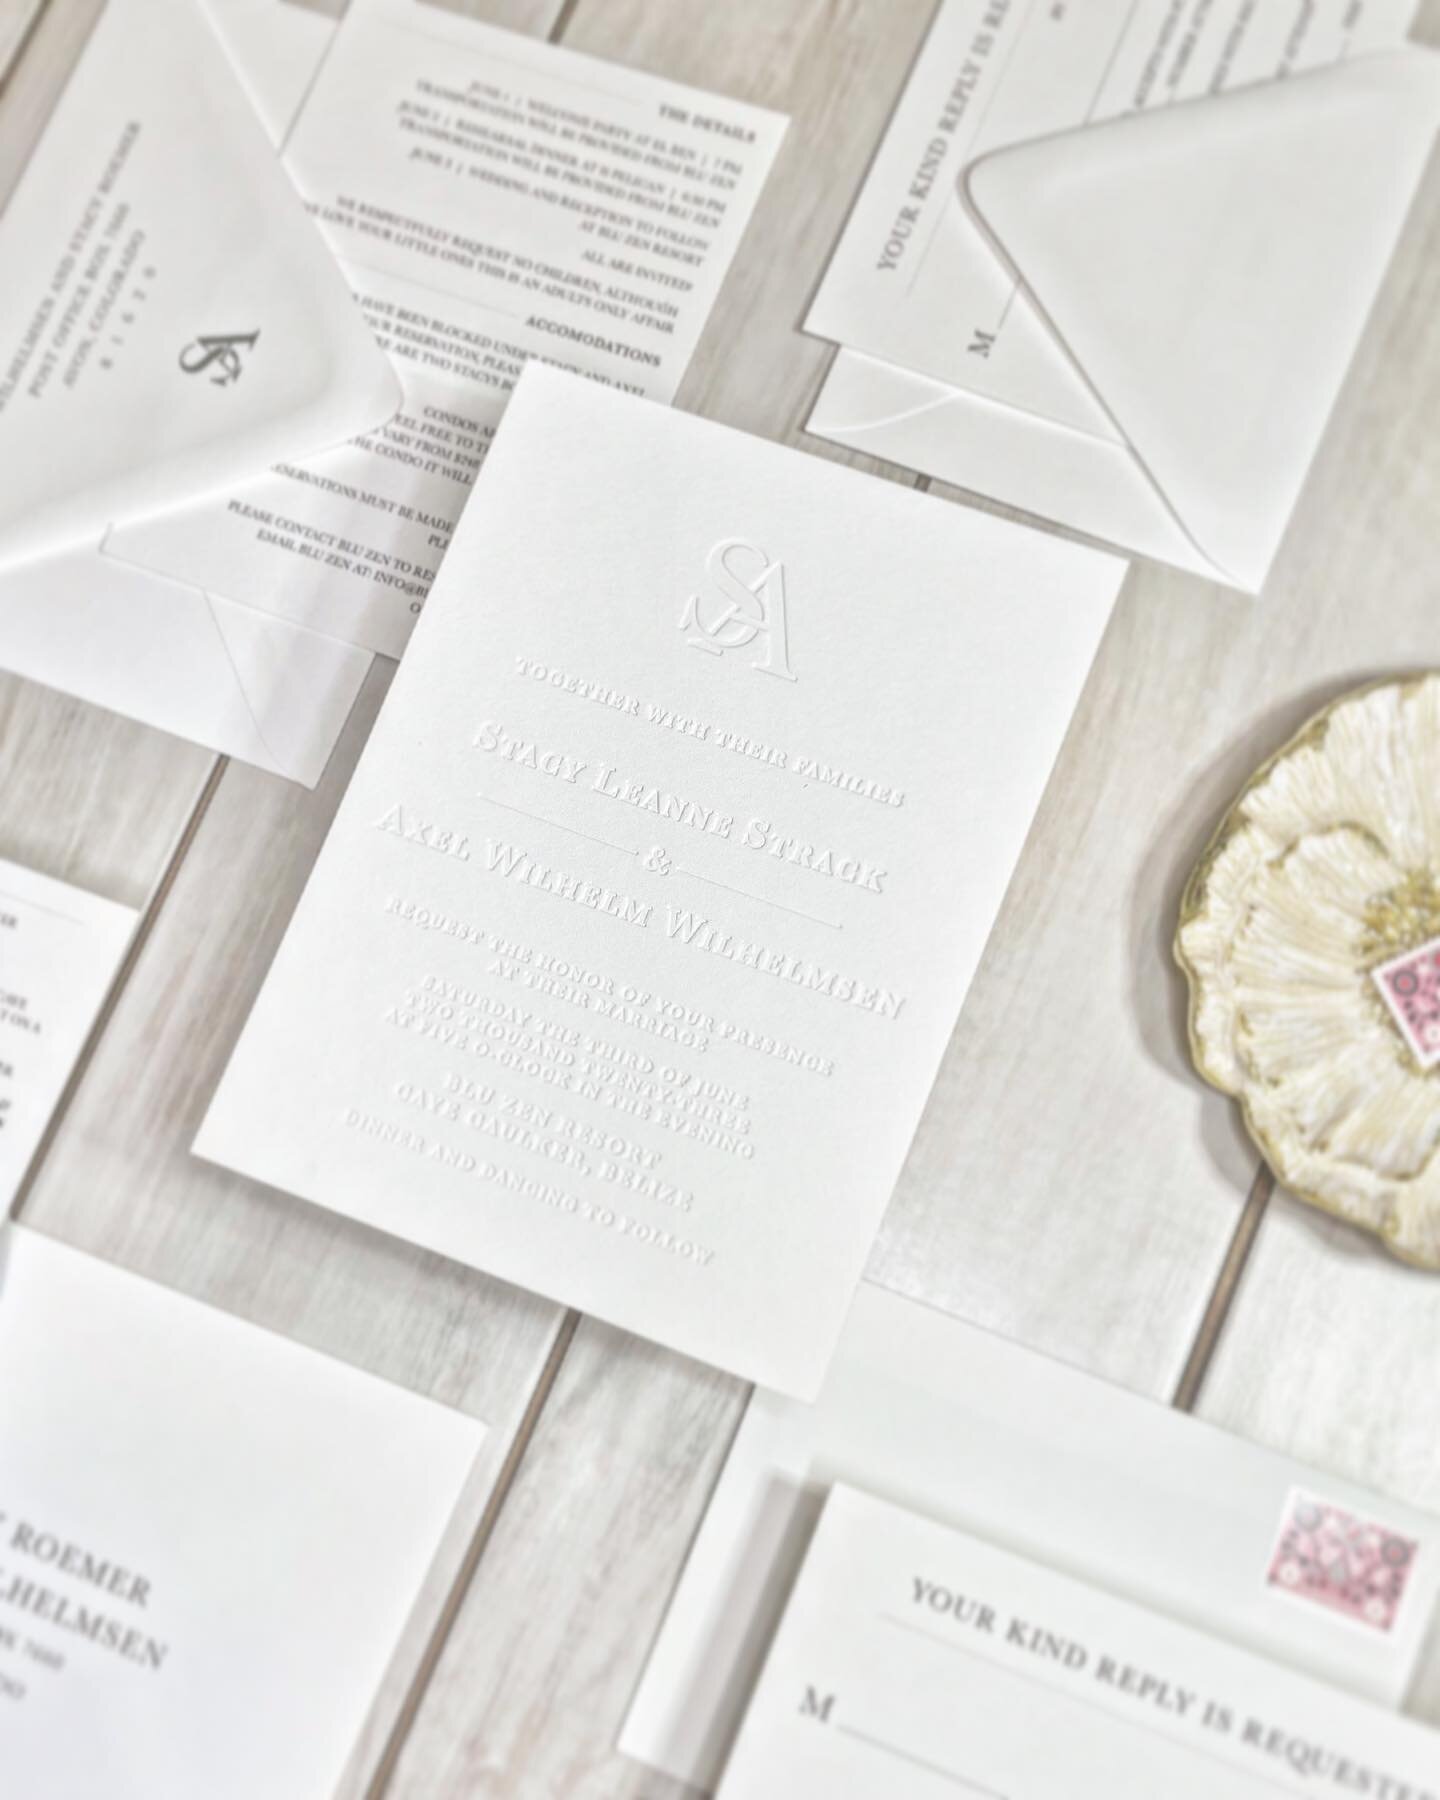 Modern meets timeless 🤍

I know I&rsquo;ve said it before, but I have a thing for texture 🥰 Buttery soft cotton paper + blind letterpress, ooh I wish you could hold this invite in your hand